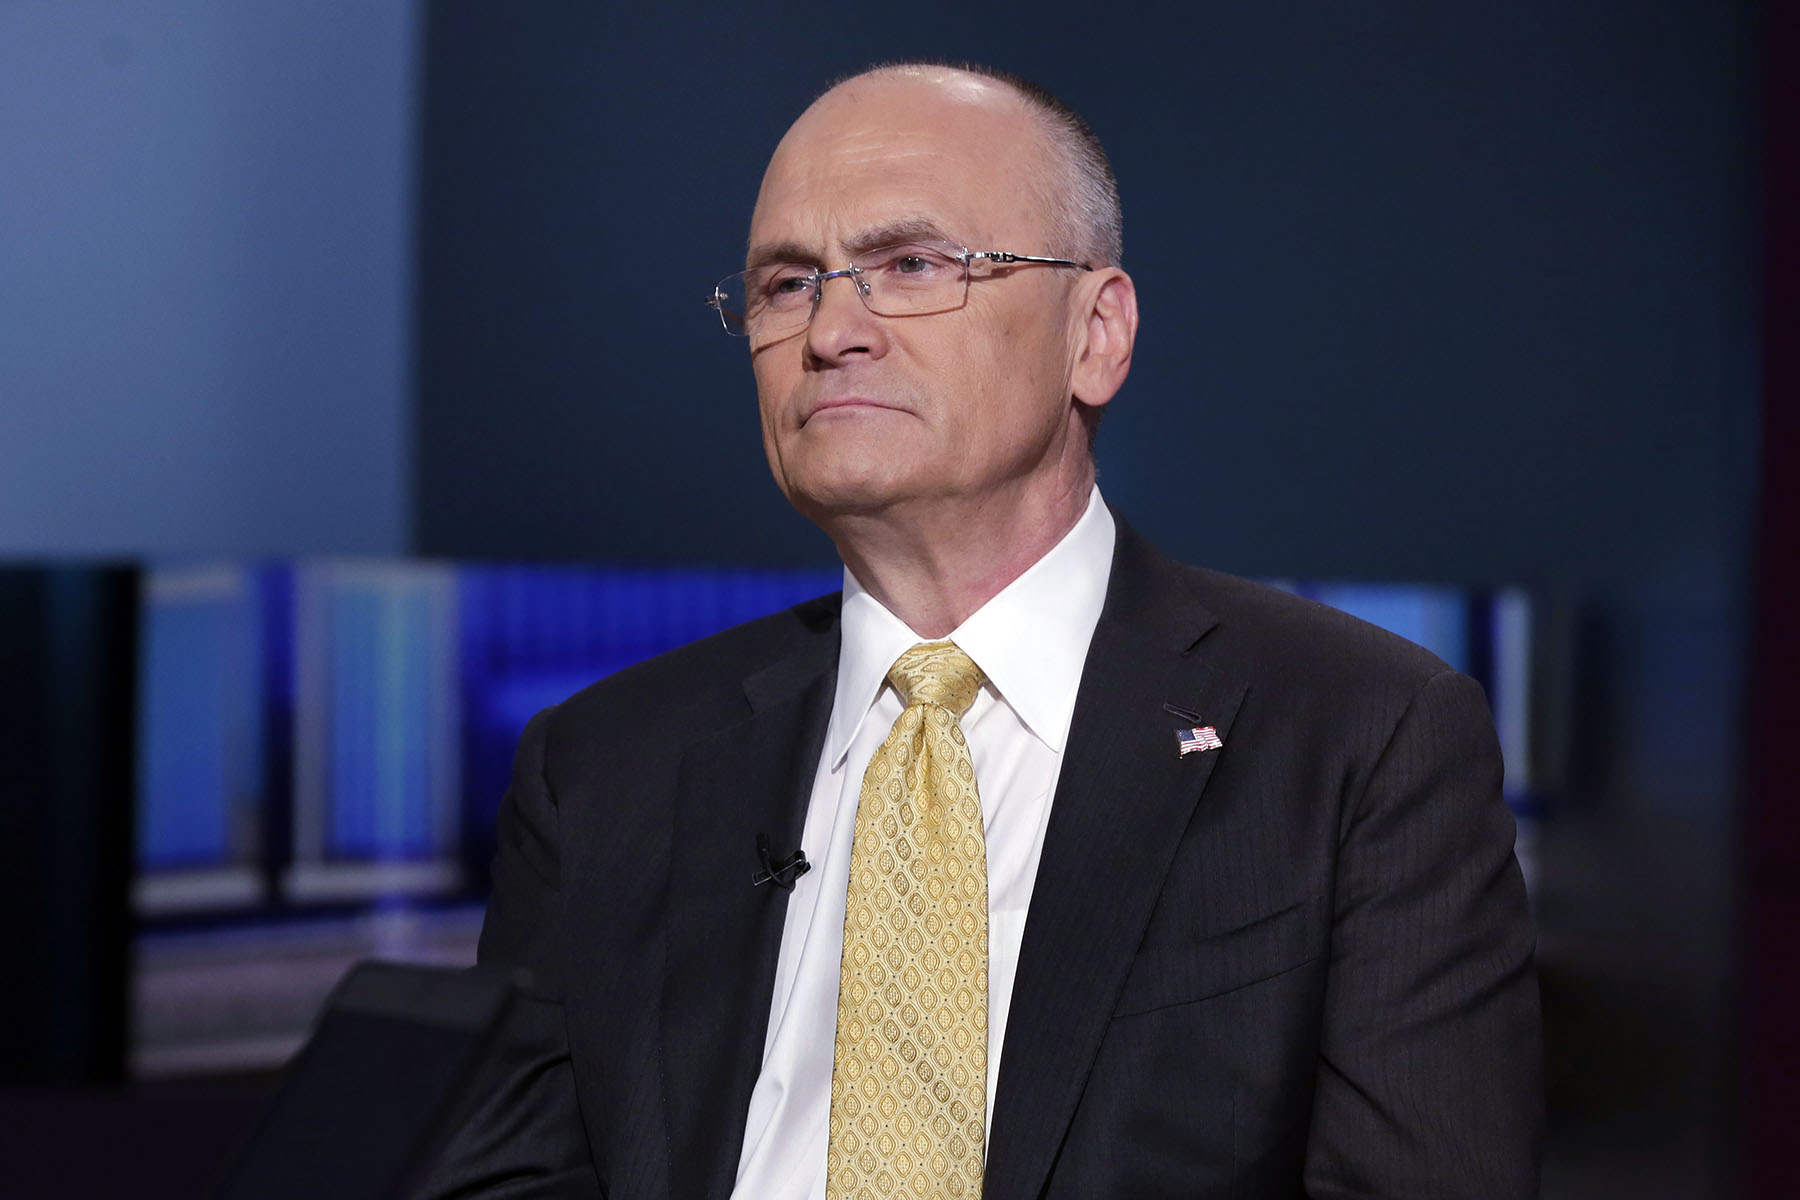 Andrew Puzder is interviewed by anchor Neil Cavuto during his "Cavuto: Coast to Coast" program, on the Fox Business Network.